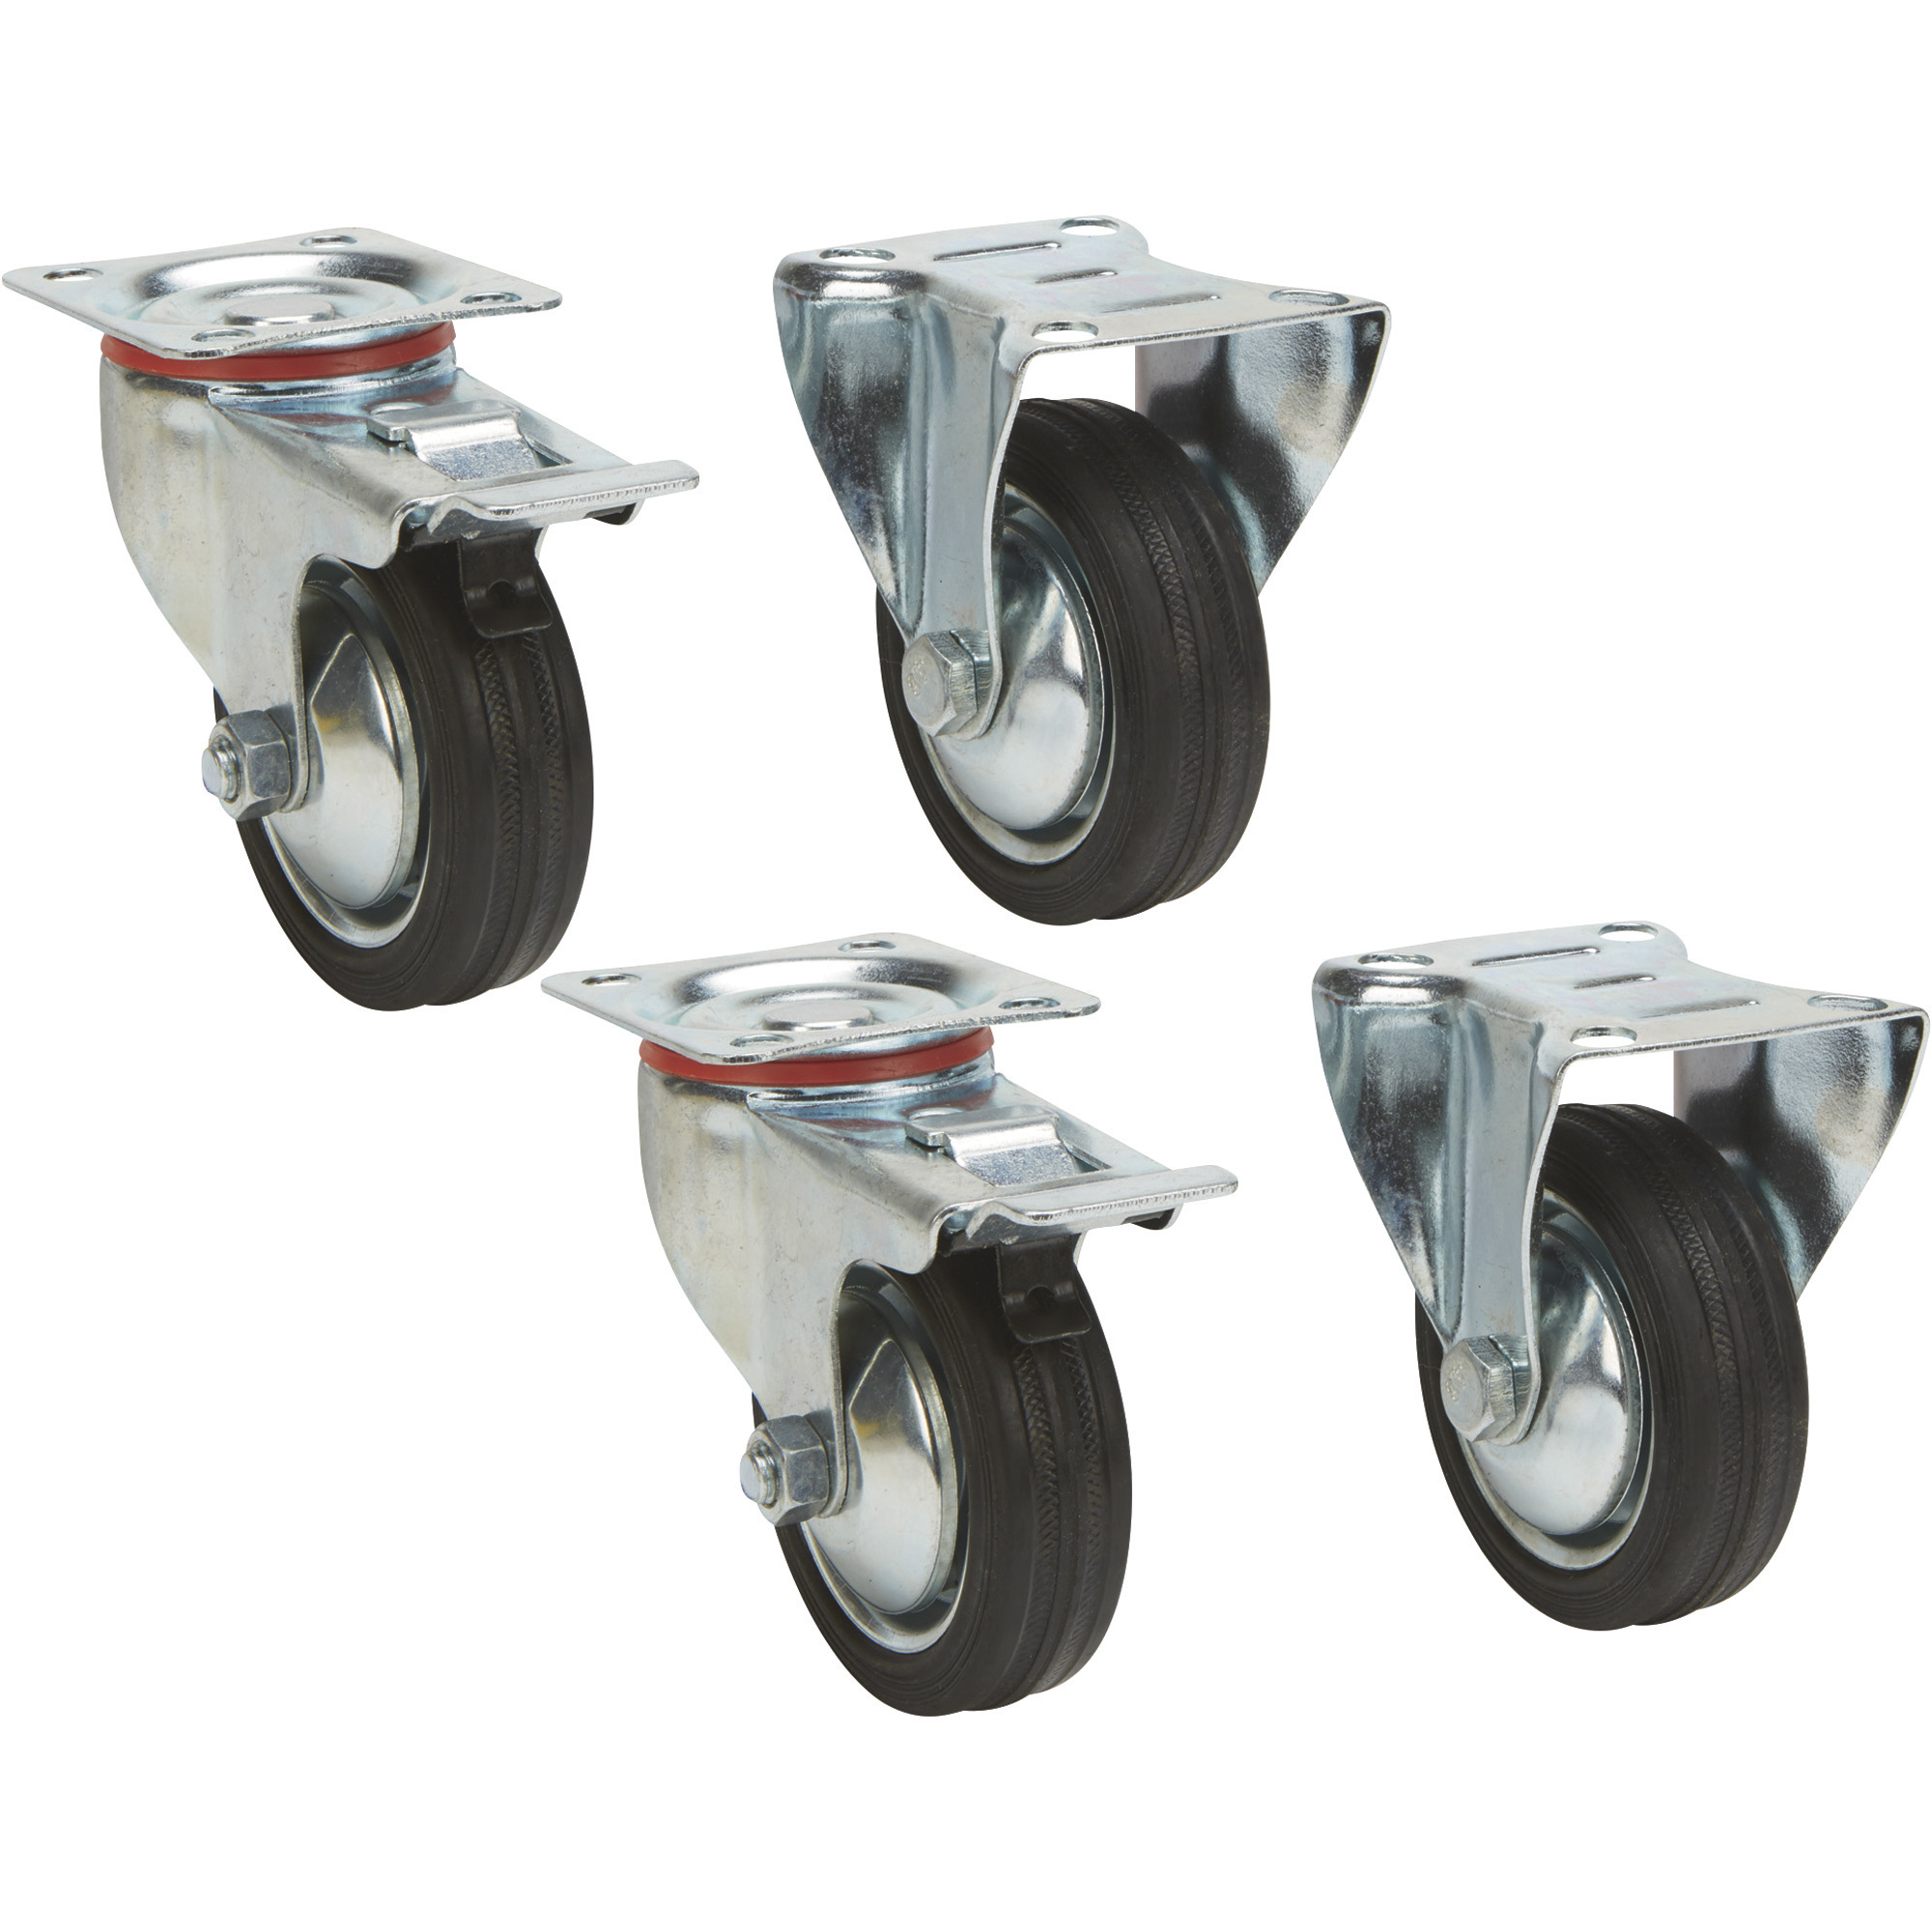 Ironton 3Inch Rubber Casters, 4-Pack, 440-Lb. Total Capacity, 110-Lb. Capacity Each